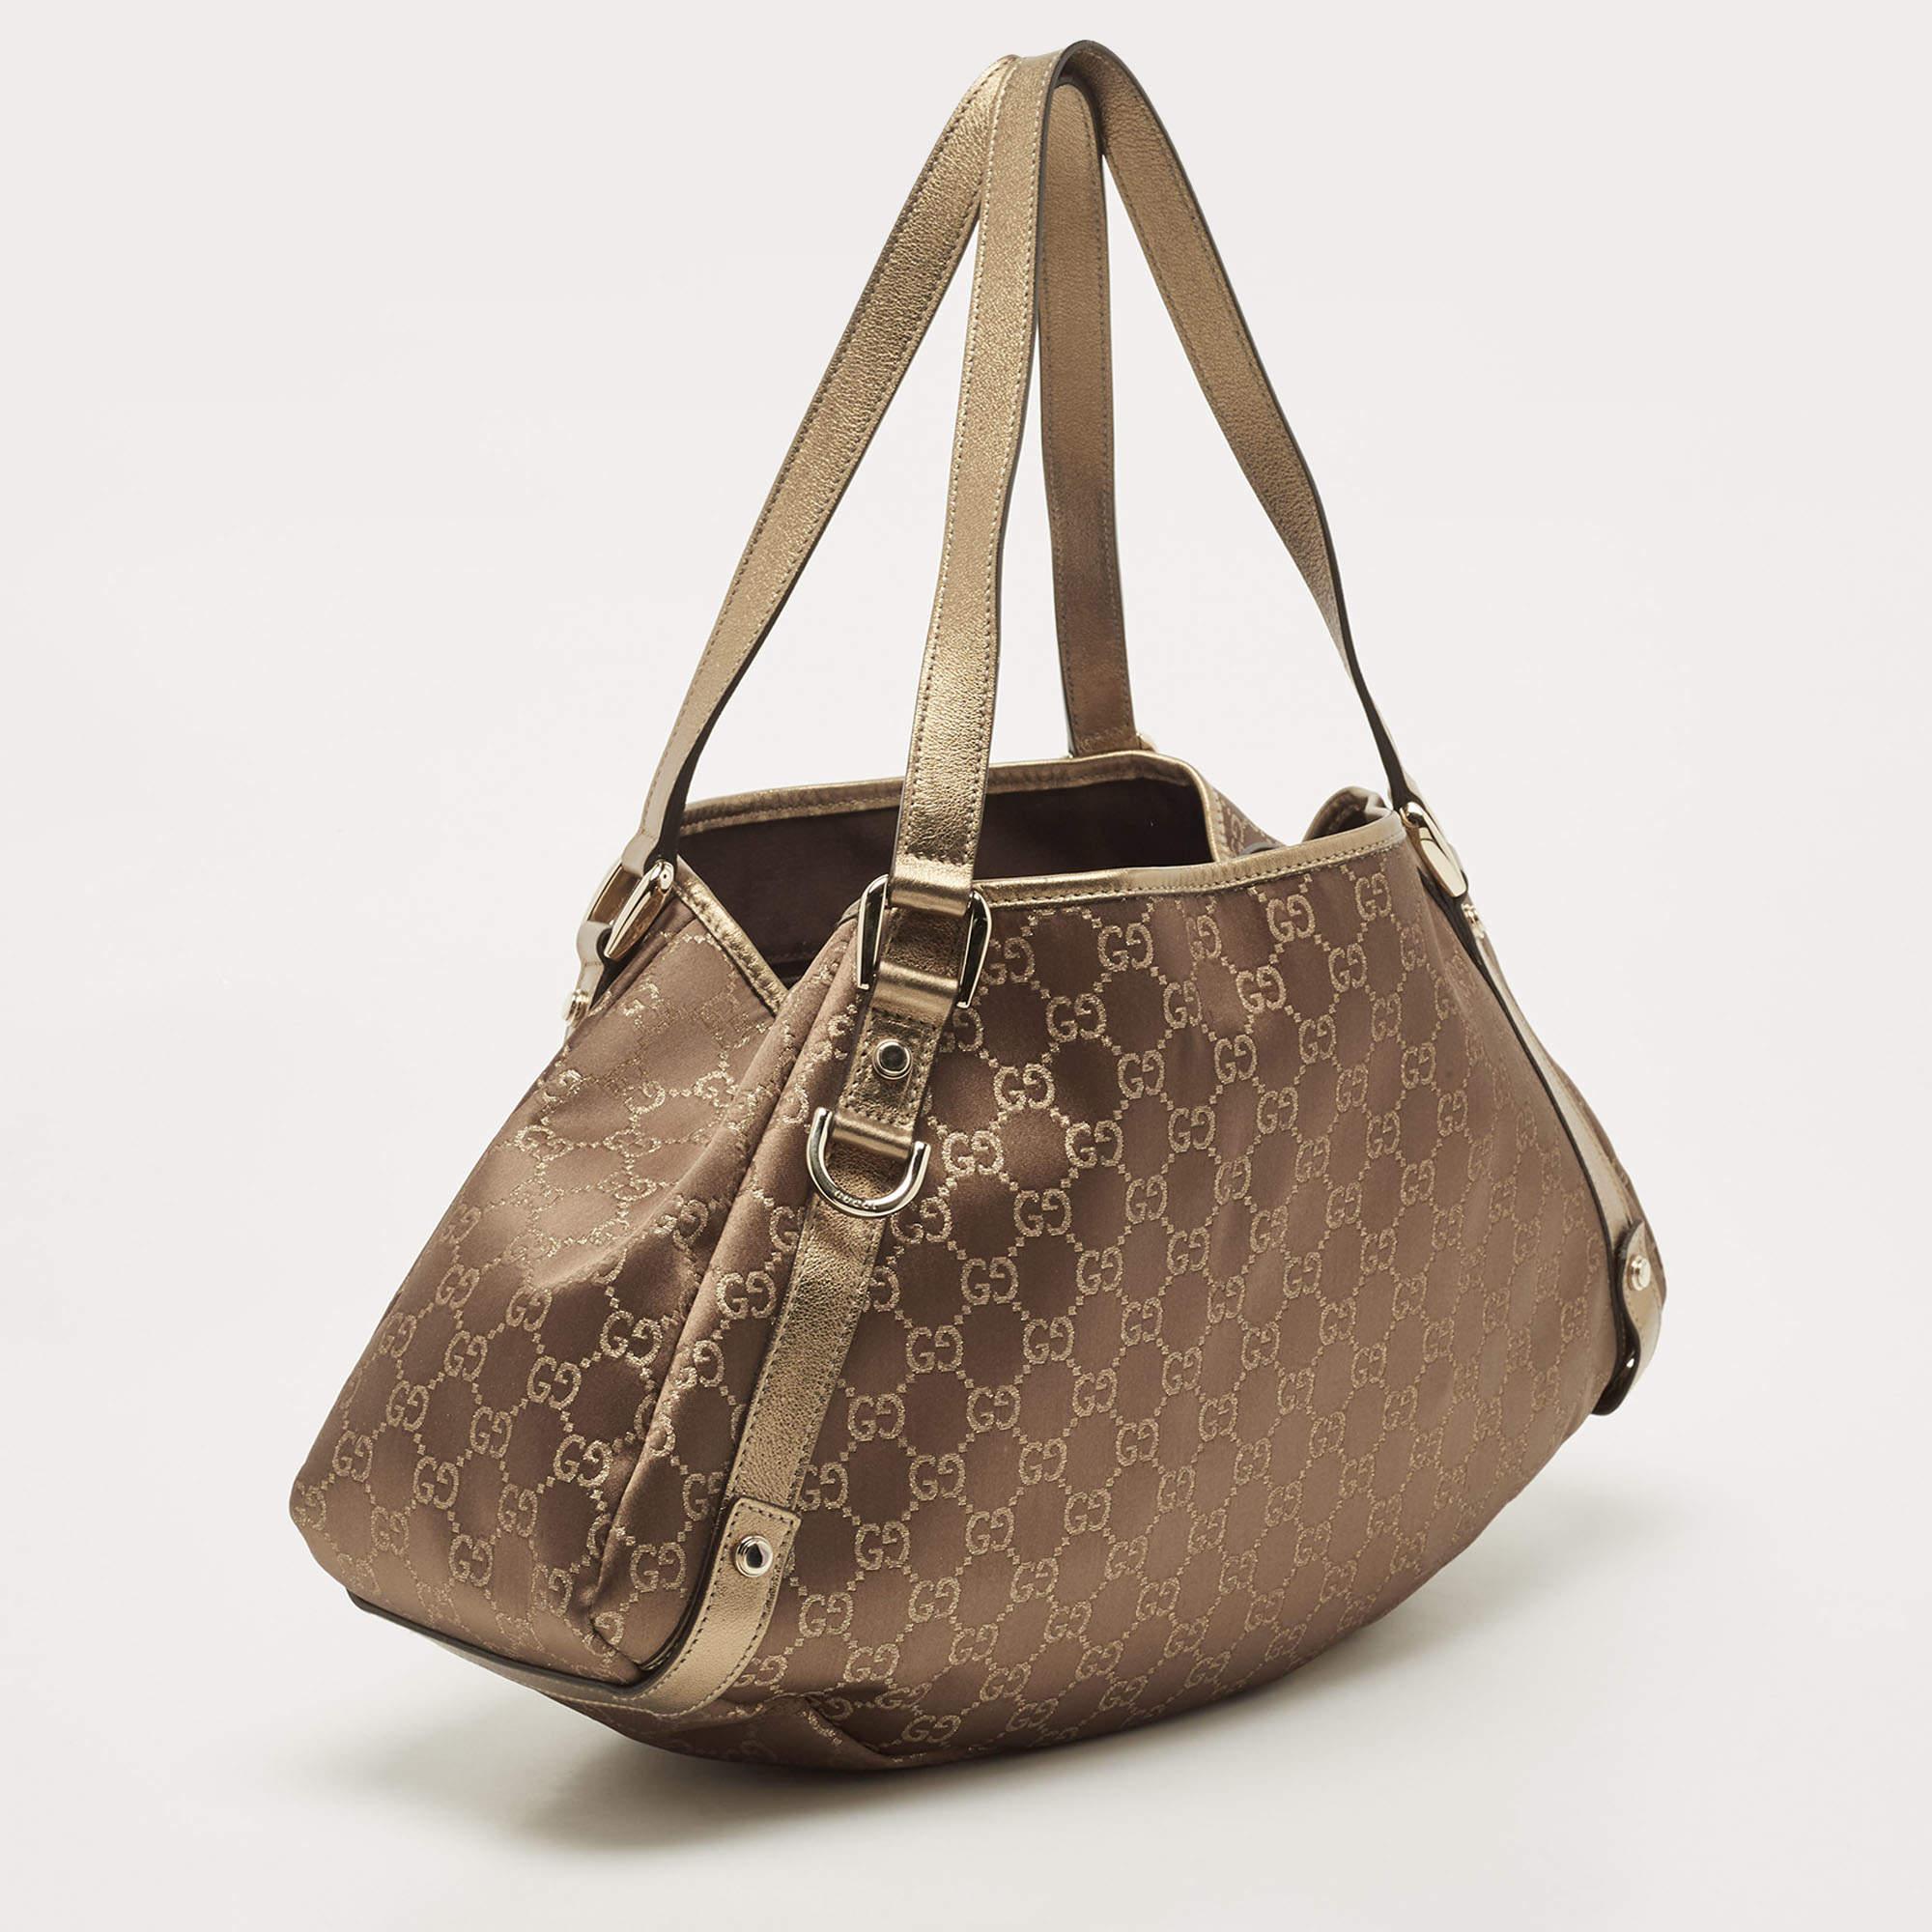 Gucci ensures you have a wonderful accessory to accompany you every day with this well-crafted bag. It has a signature look and a practical size.

